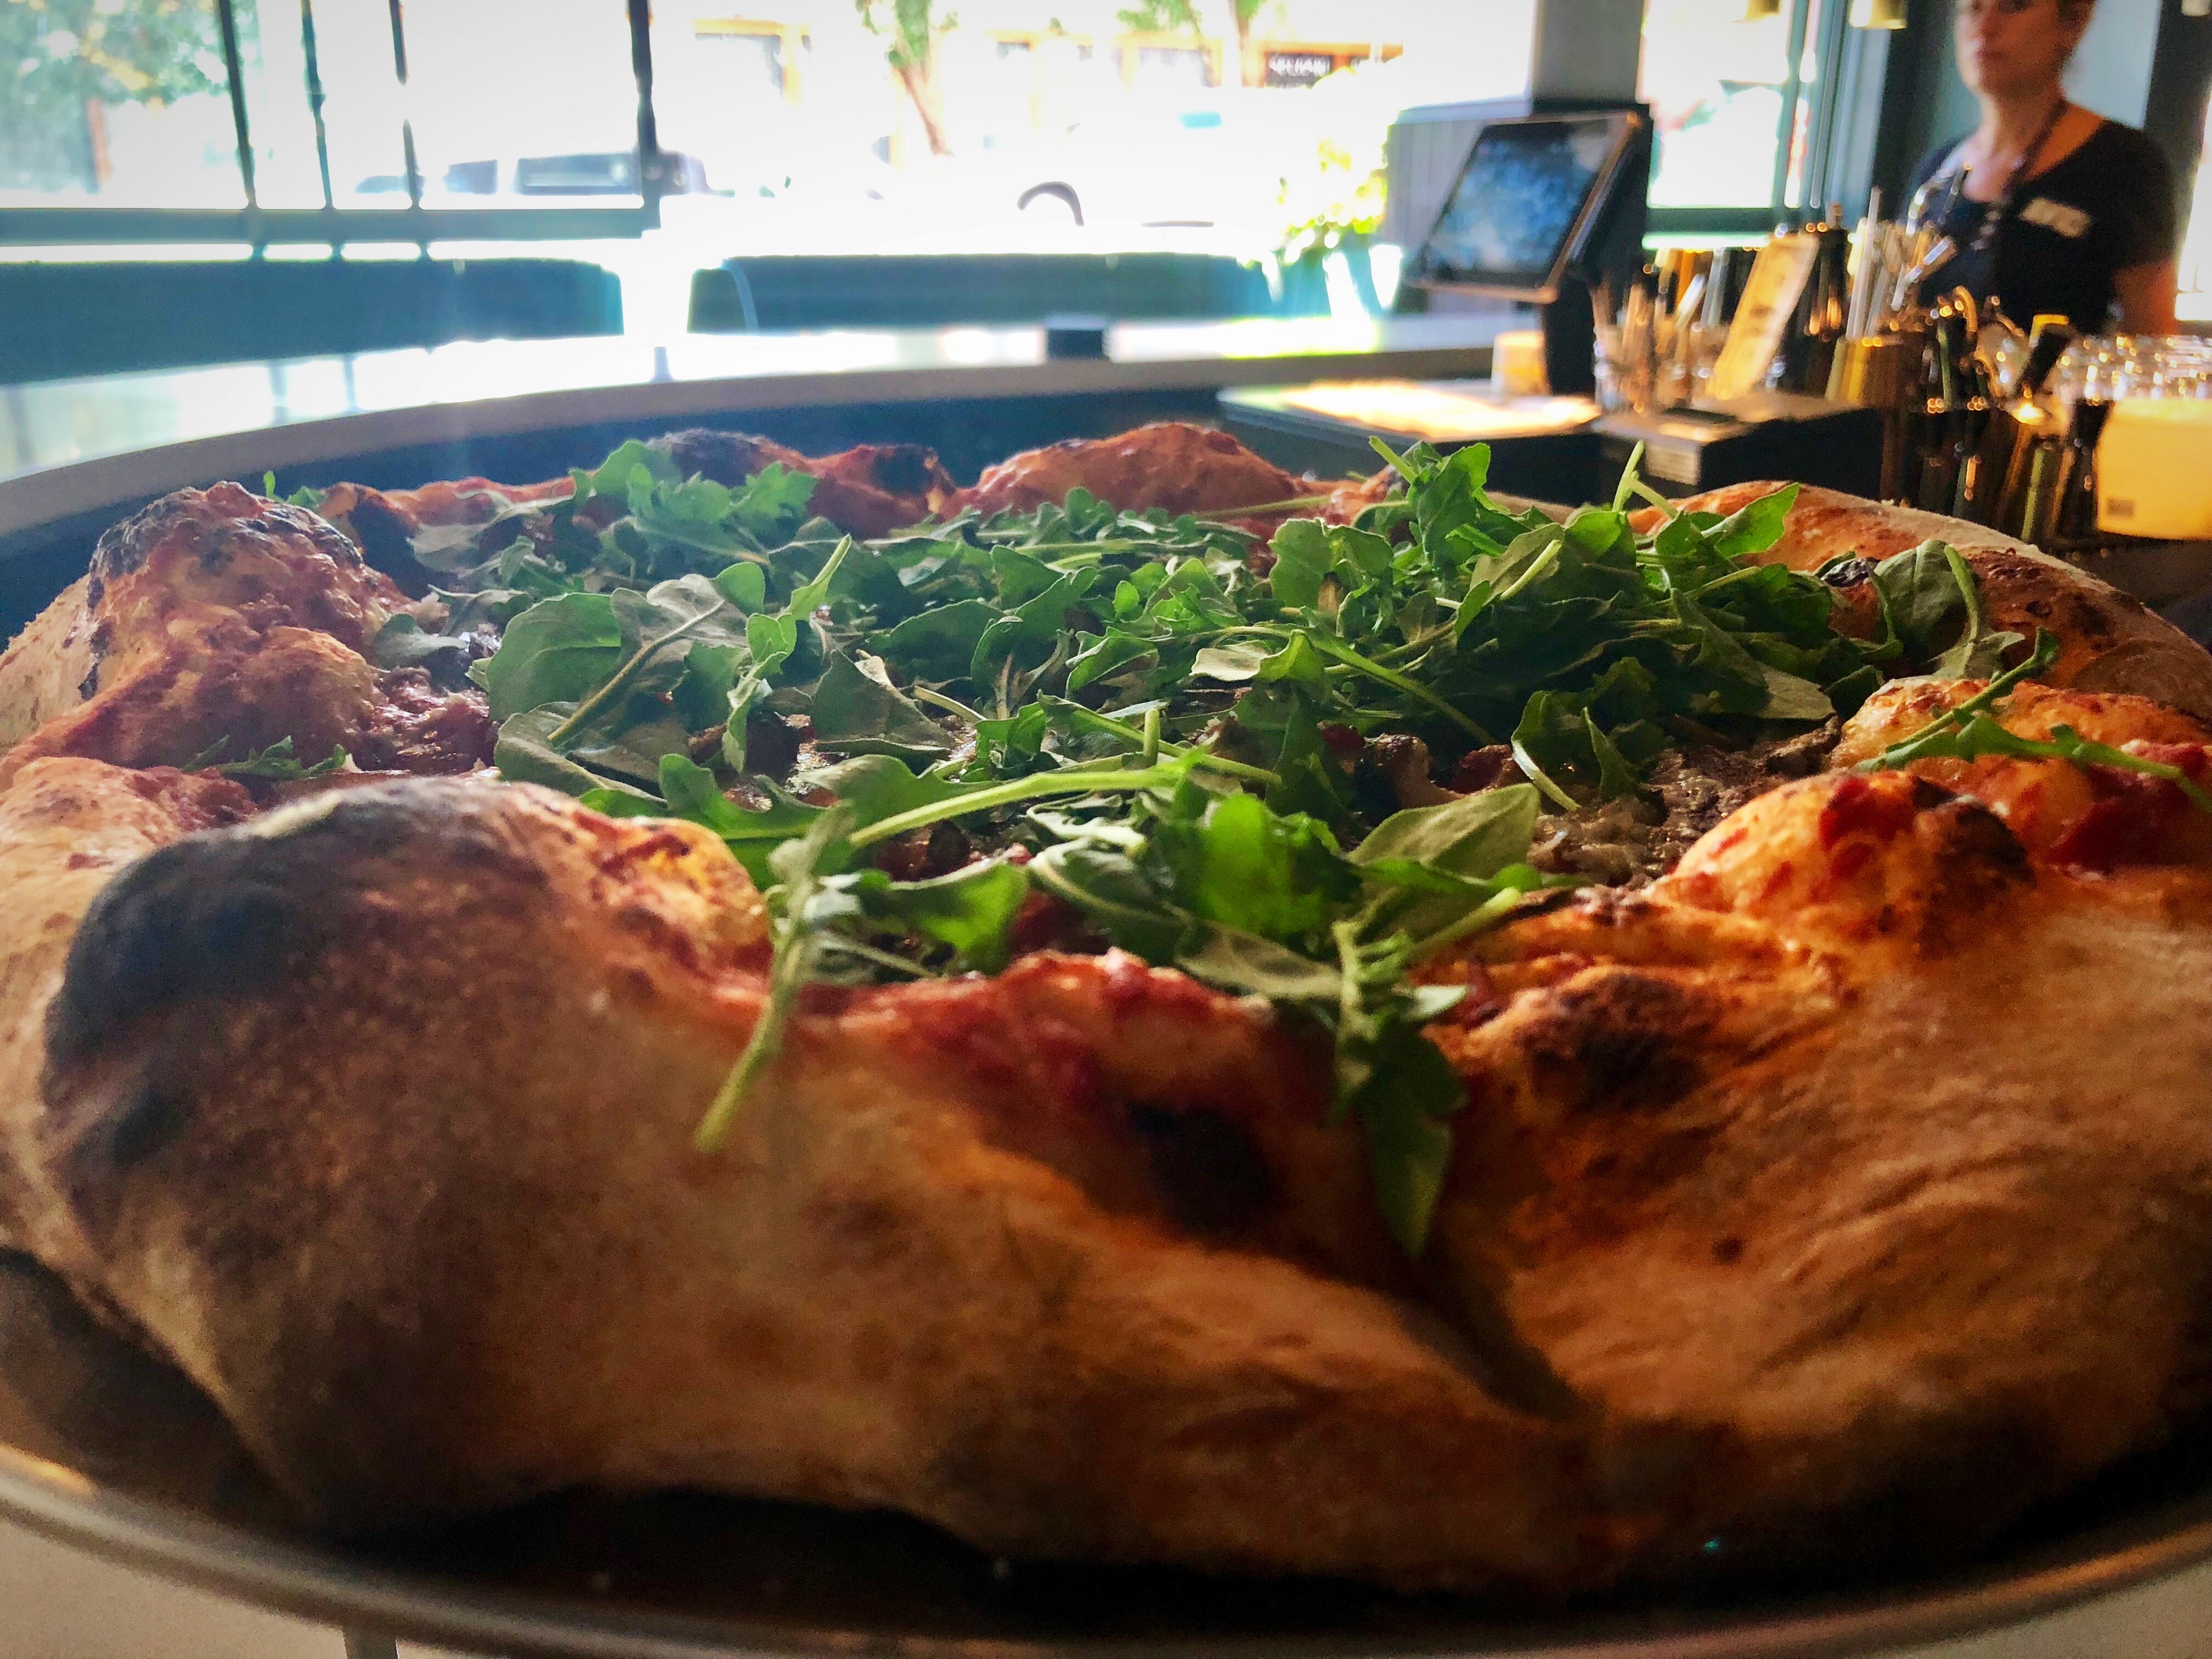 The 16" Mazama Pizza at the new Avid Cider Co. Cider House in Portland's Pearl District